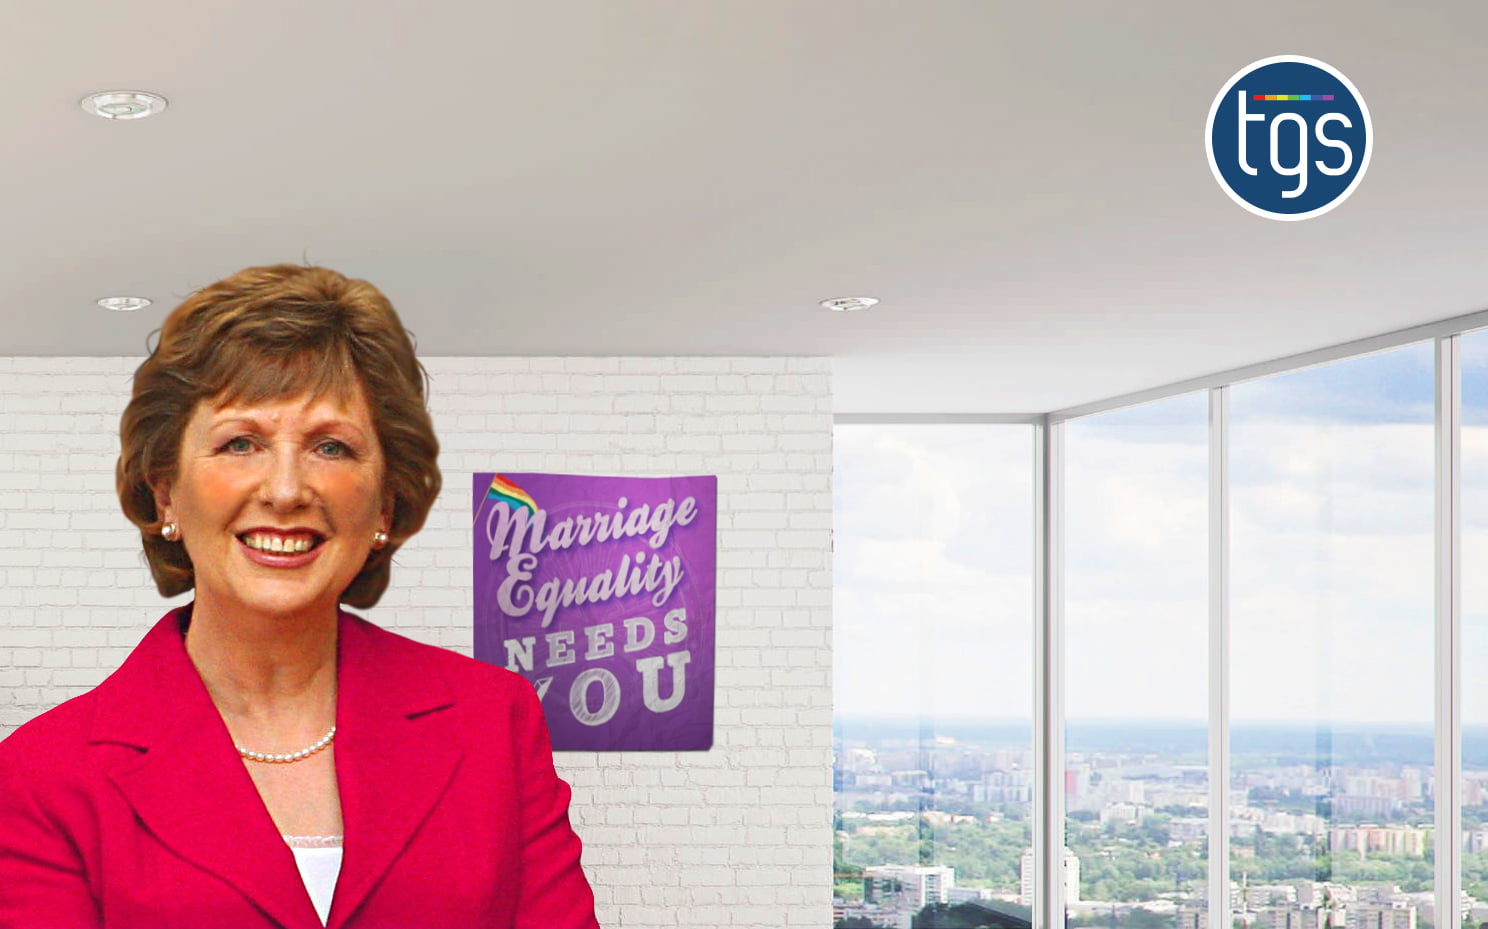 Former Irish President Mary McAleese: marriage equality is a “human rights issue”